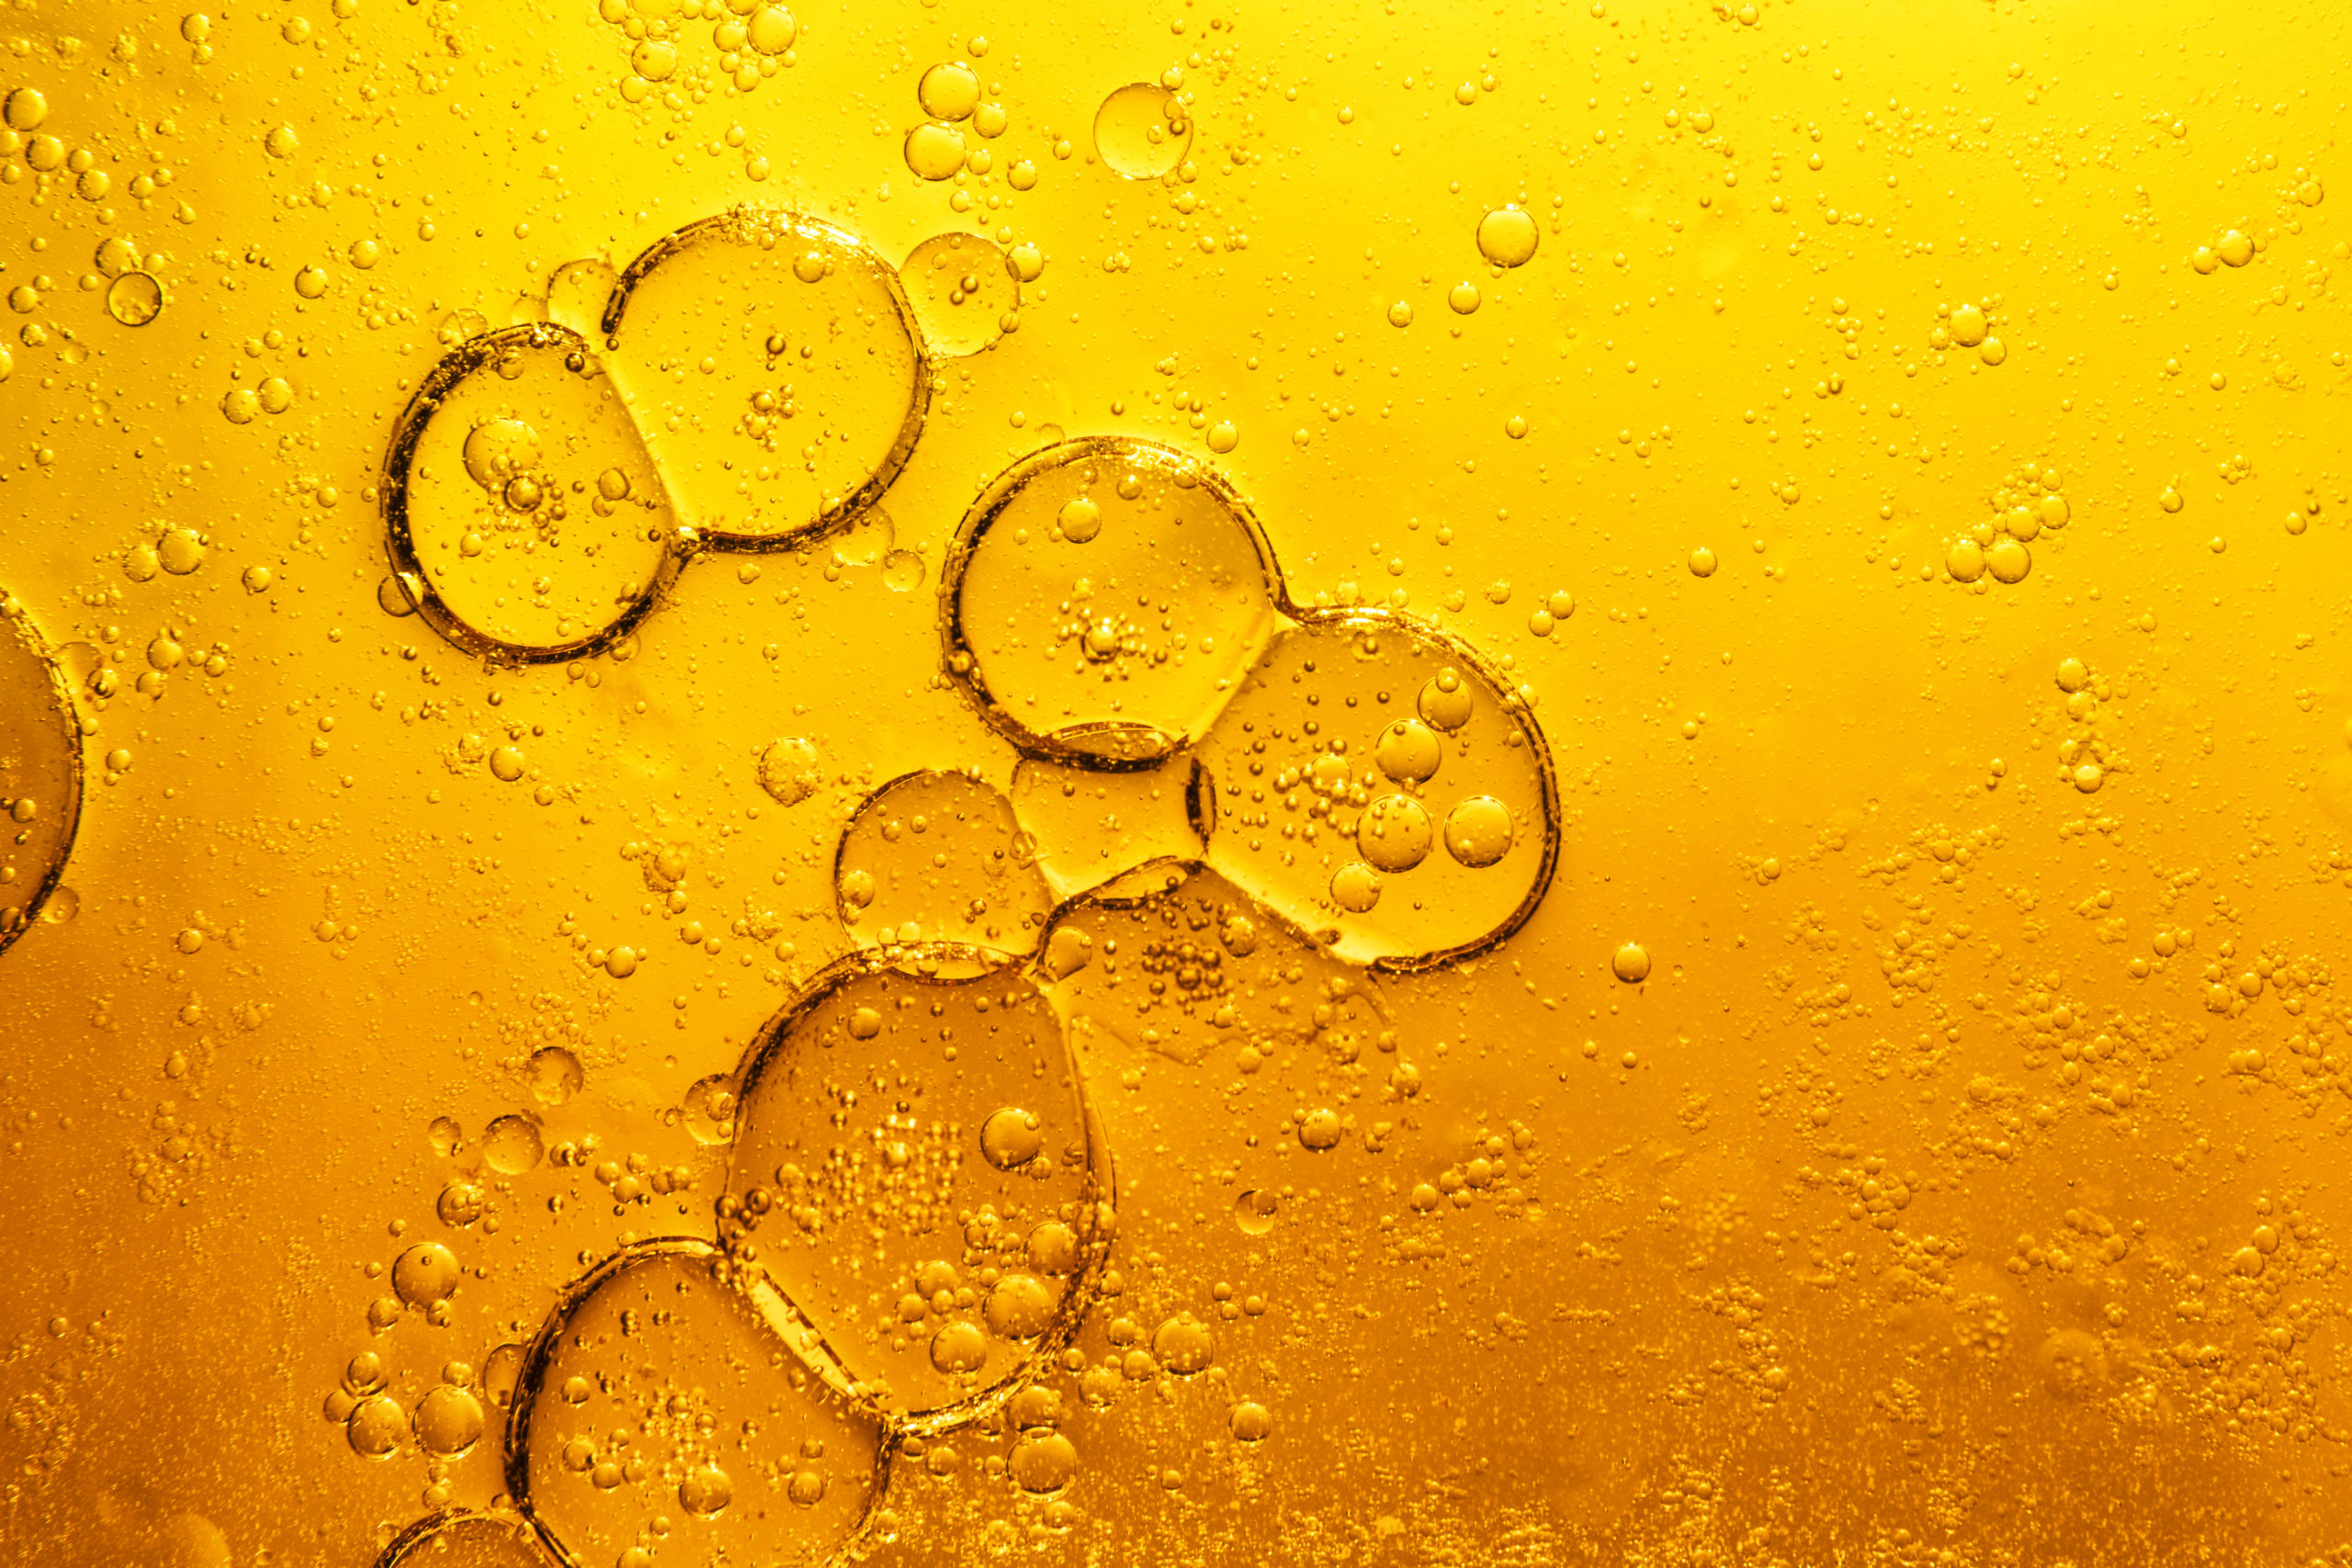 A close up of bubbles in a yellow liquid